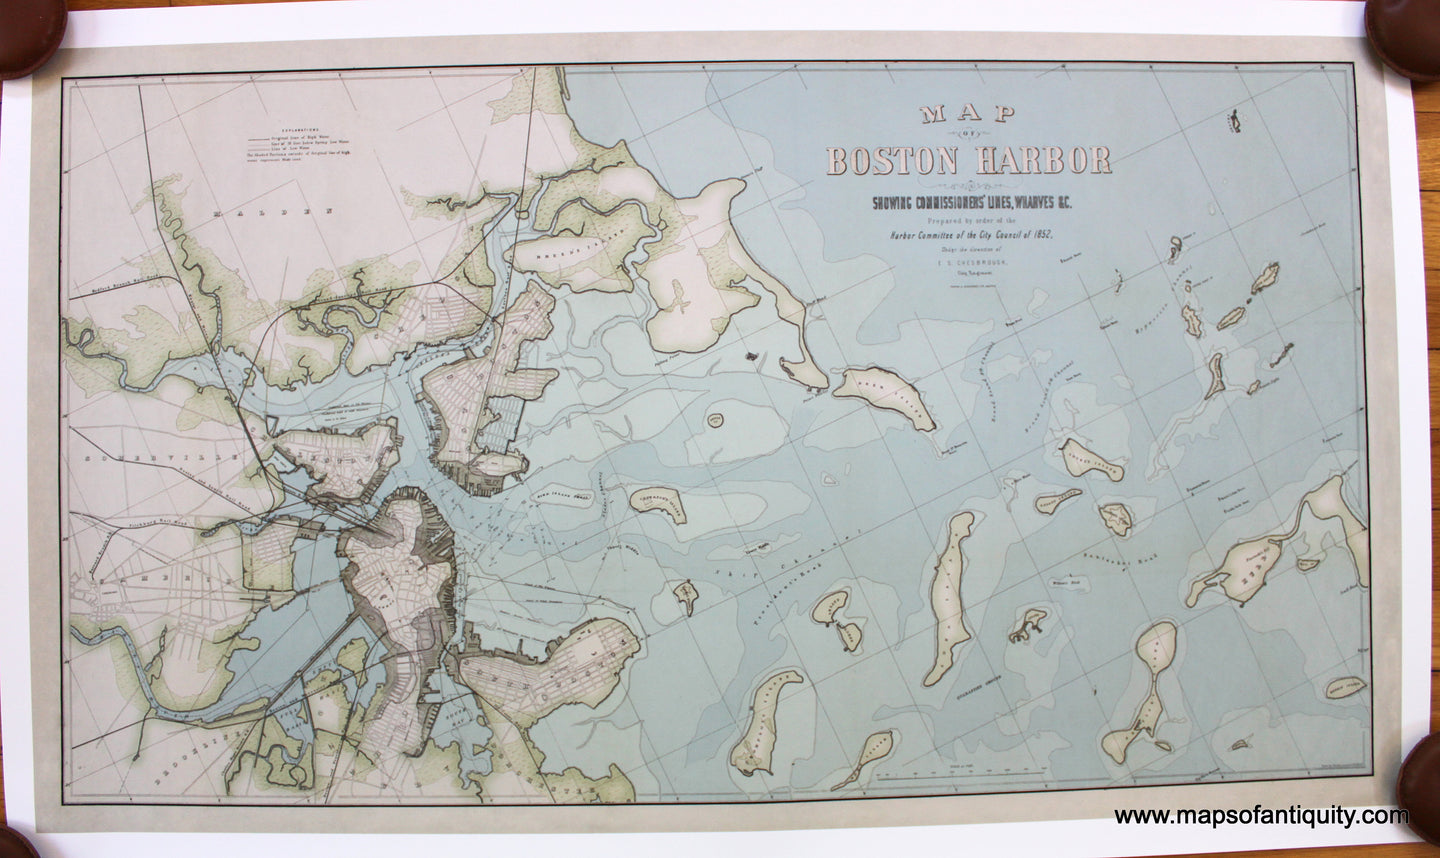 Reproduction-Map-of-Boston-Harbor-Showing-Commisssioners'-Lines-Wharves-&C.-Reproductions-1852-Harbor-Committee-of-the-City-Council-Boston-1800s-19th-century-Maps-of-Antiquity